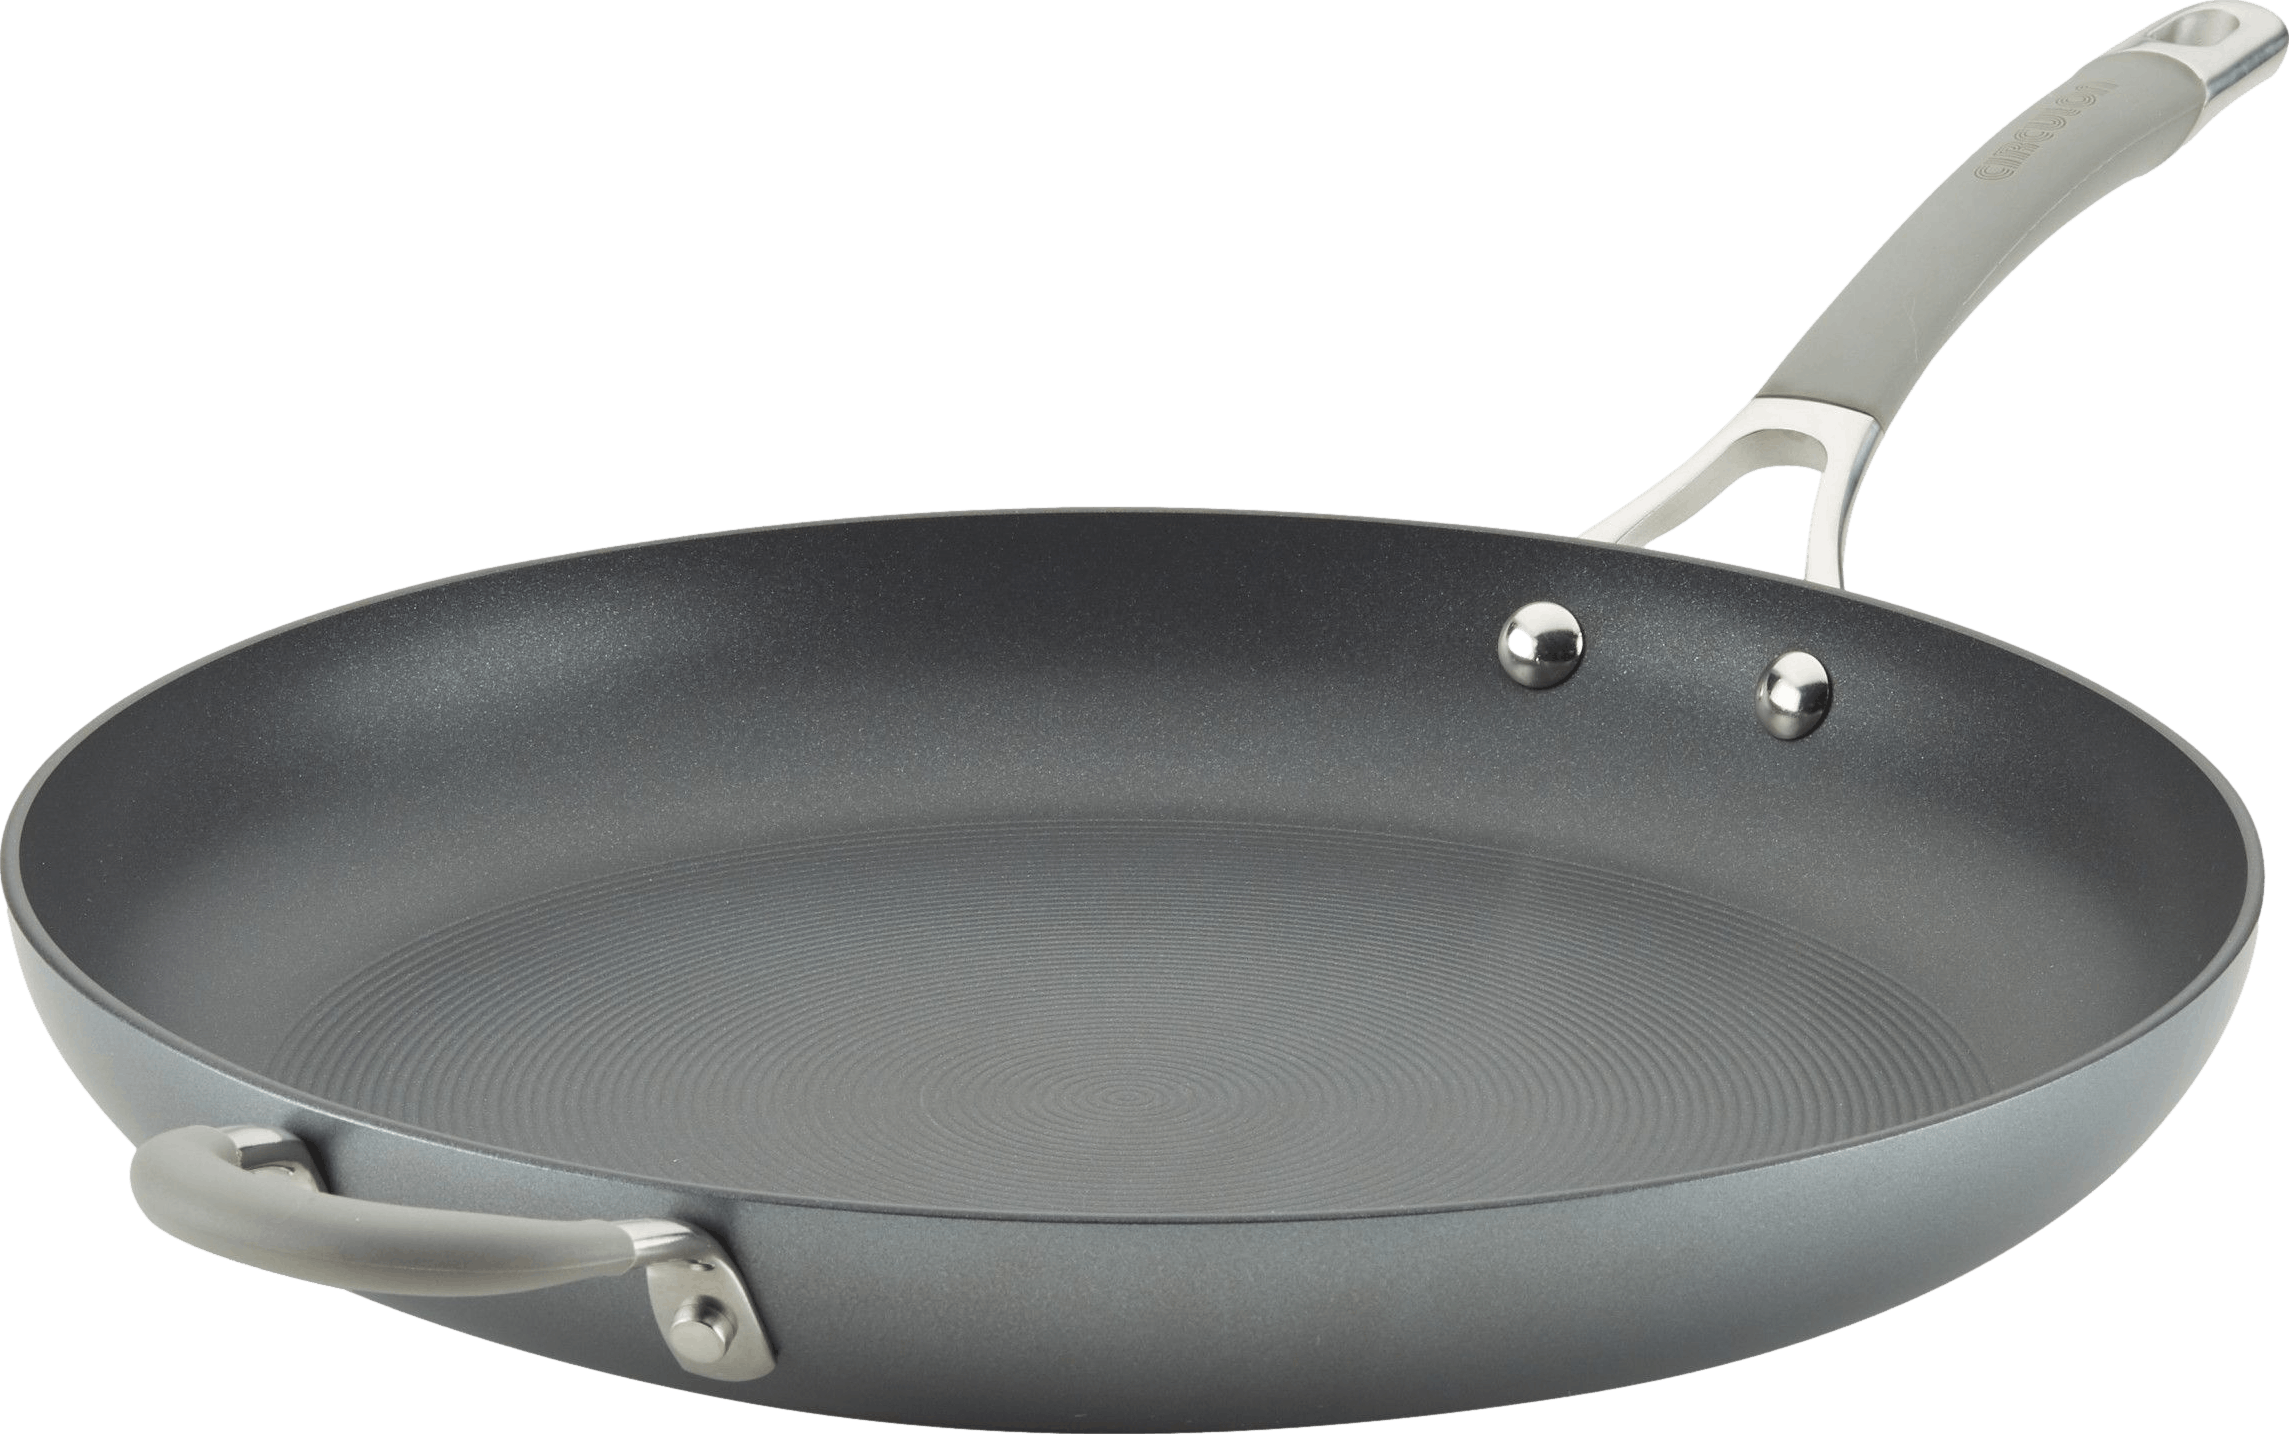 Anolon Advanced Home Hard-Anodized Nonstick Frying Pan with Helper Handle,  14.5-Inch